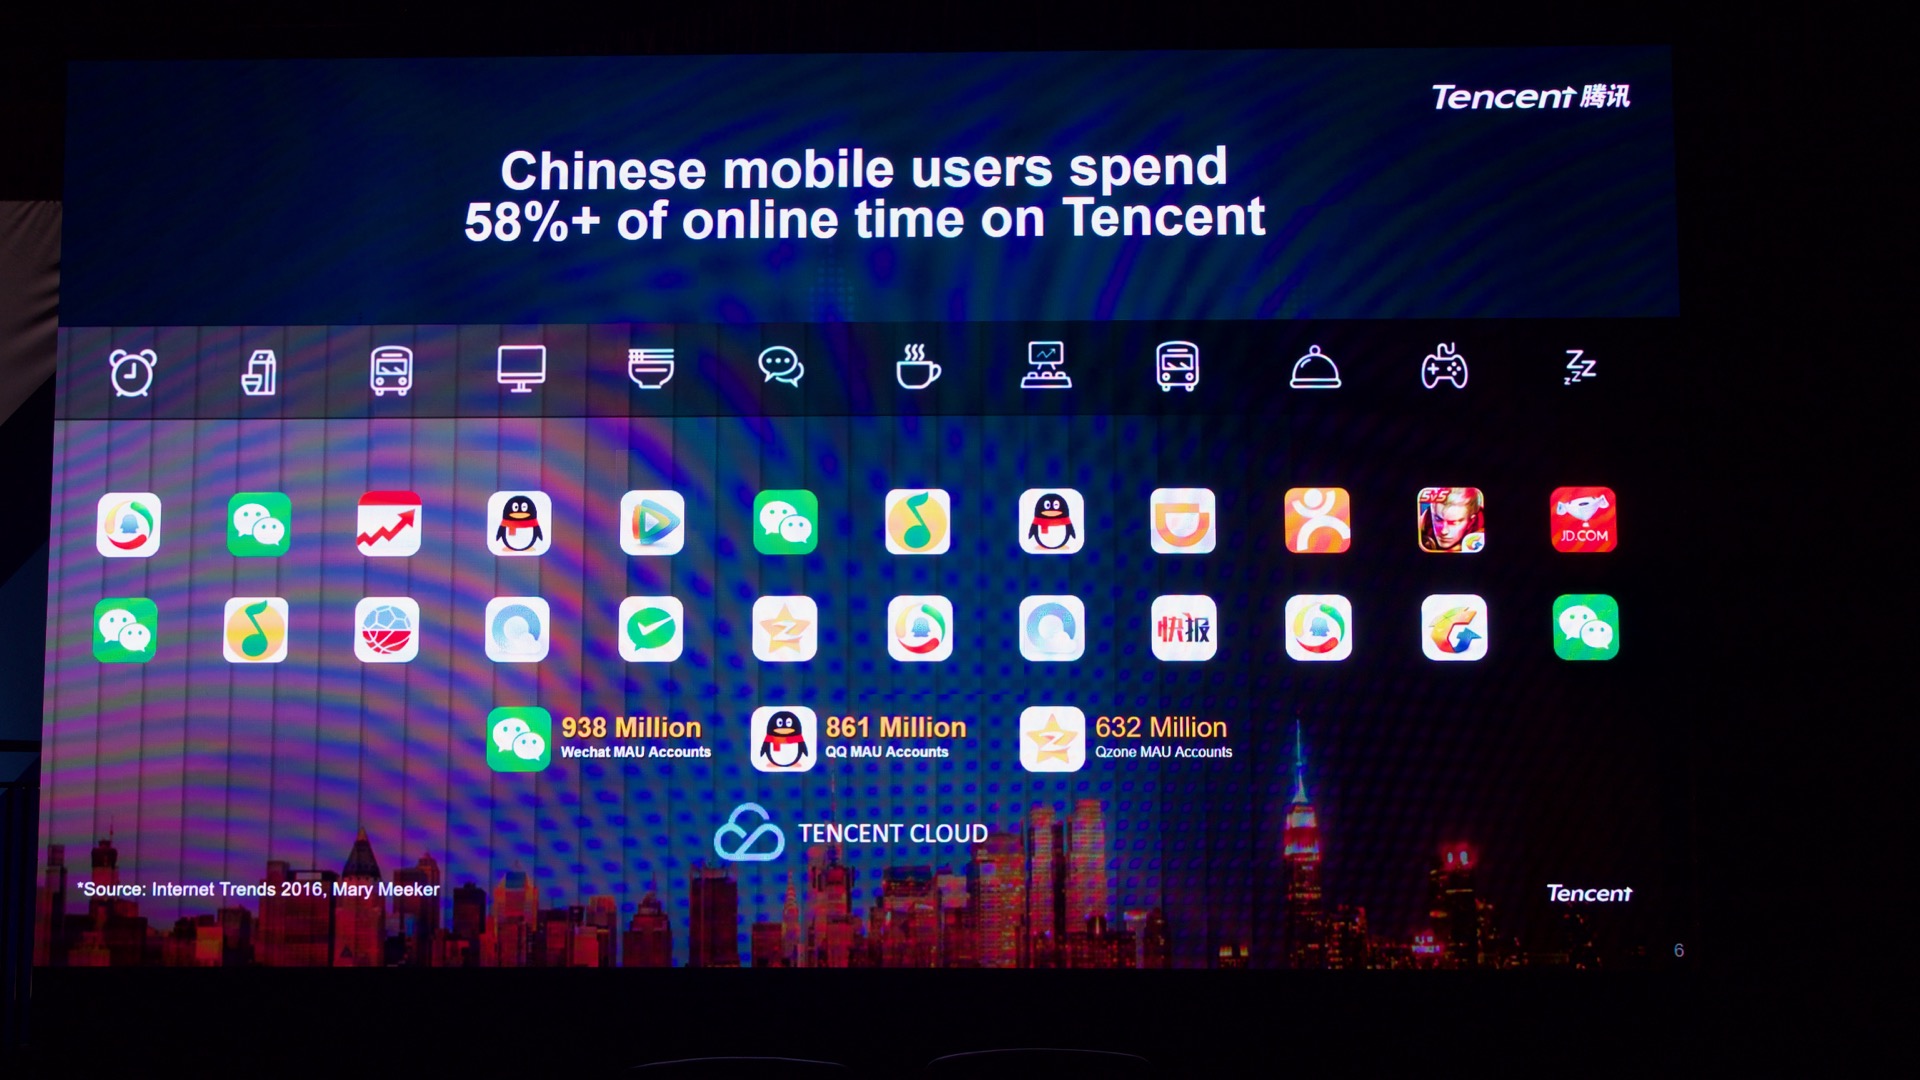 Apps made by Tencent